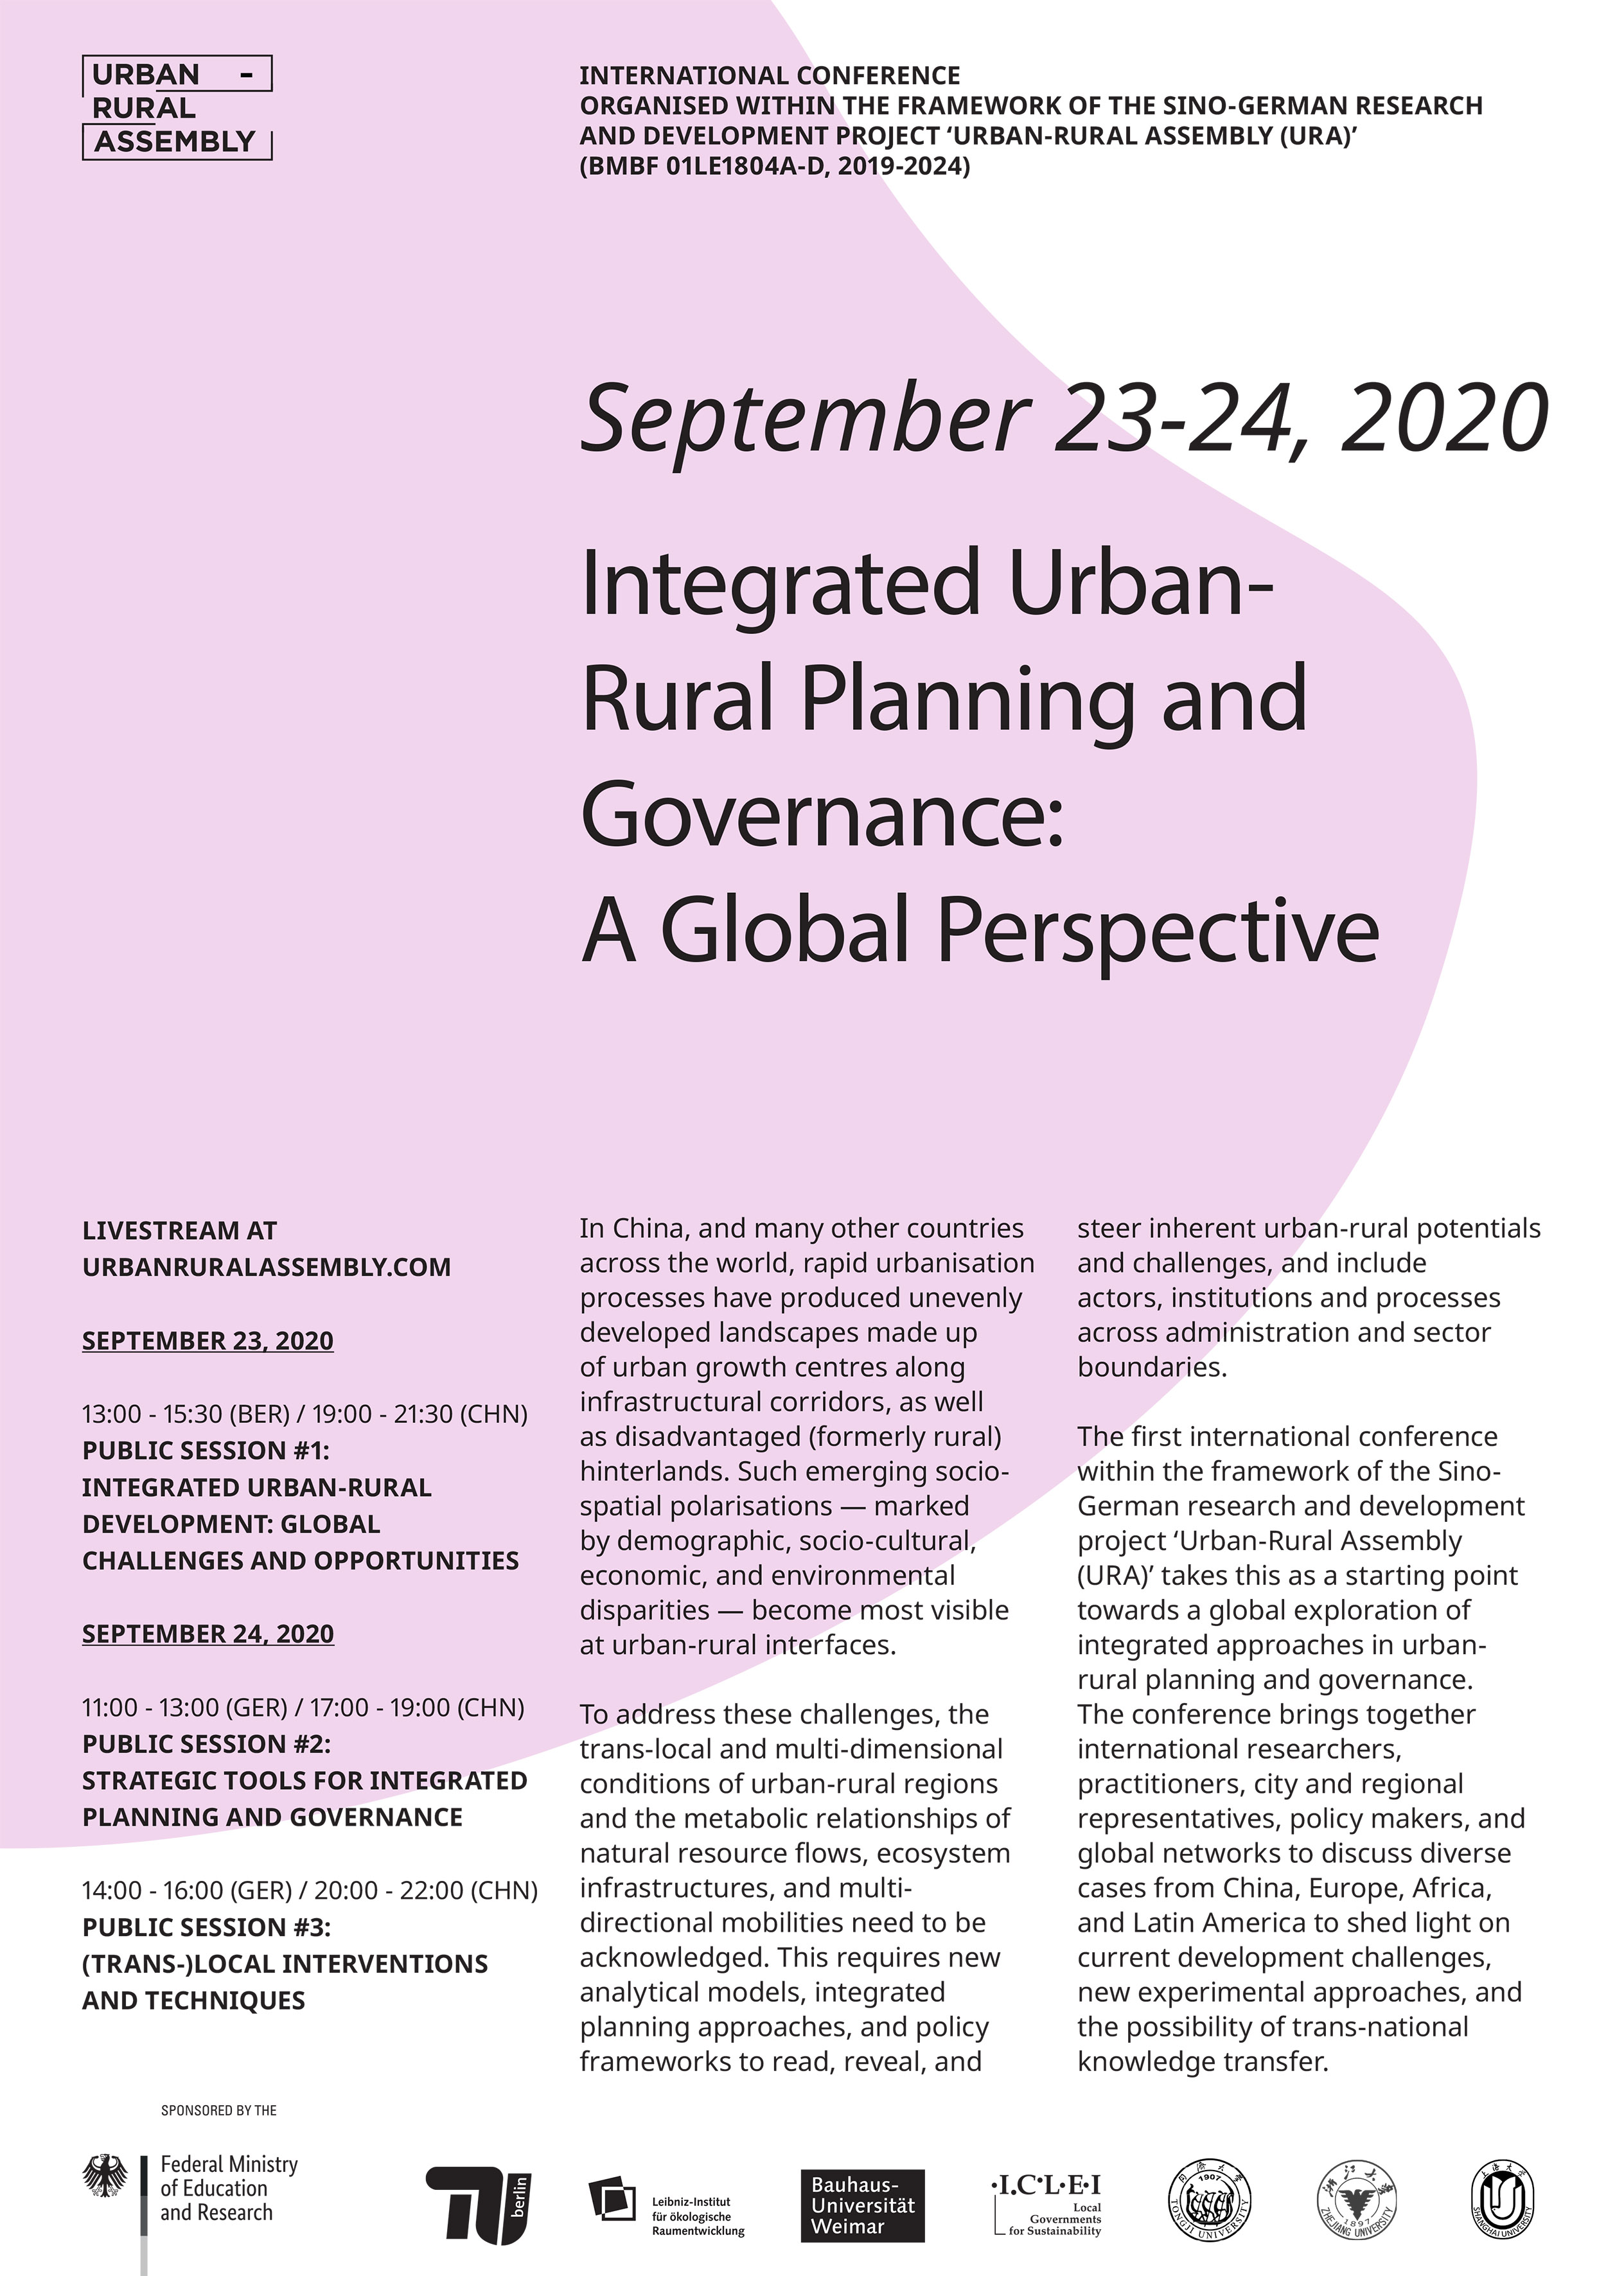 URA Conference 2020 Poster Pink